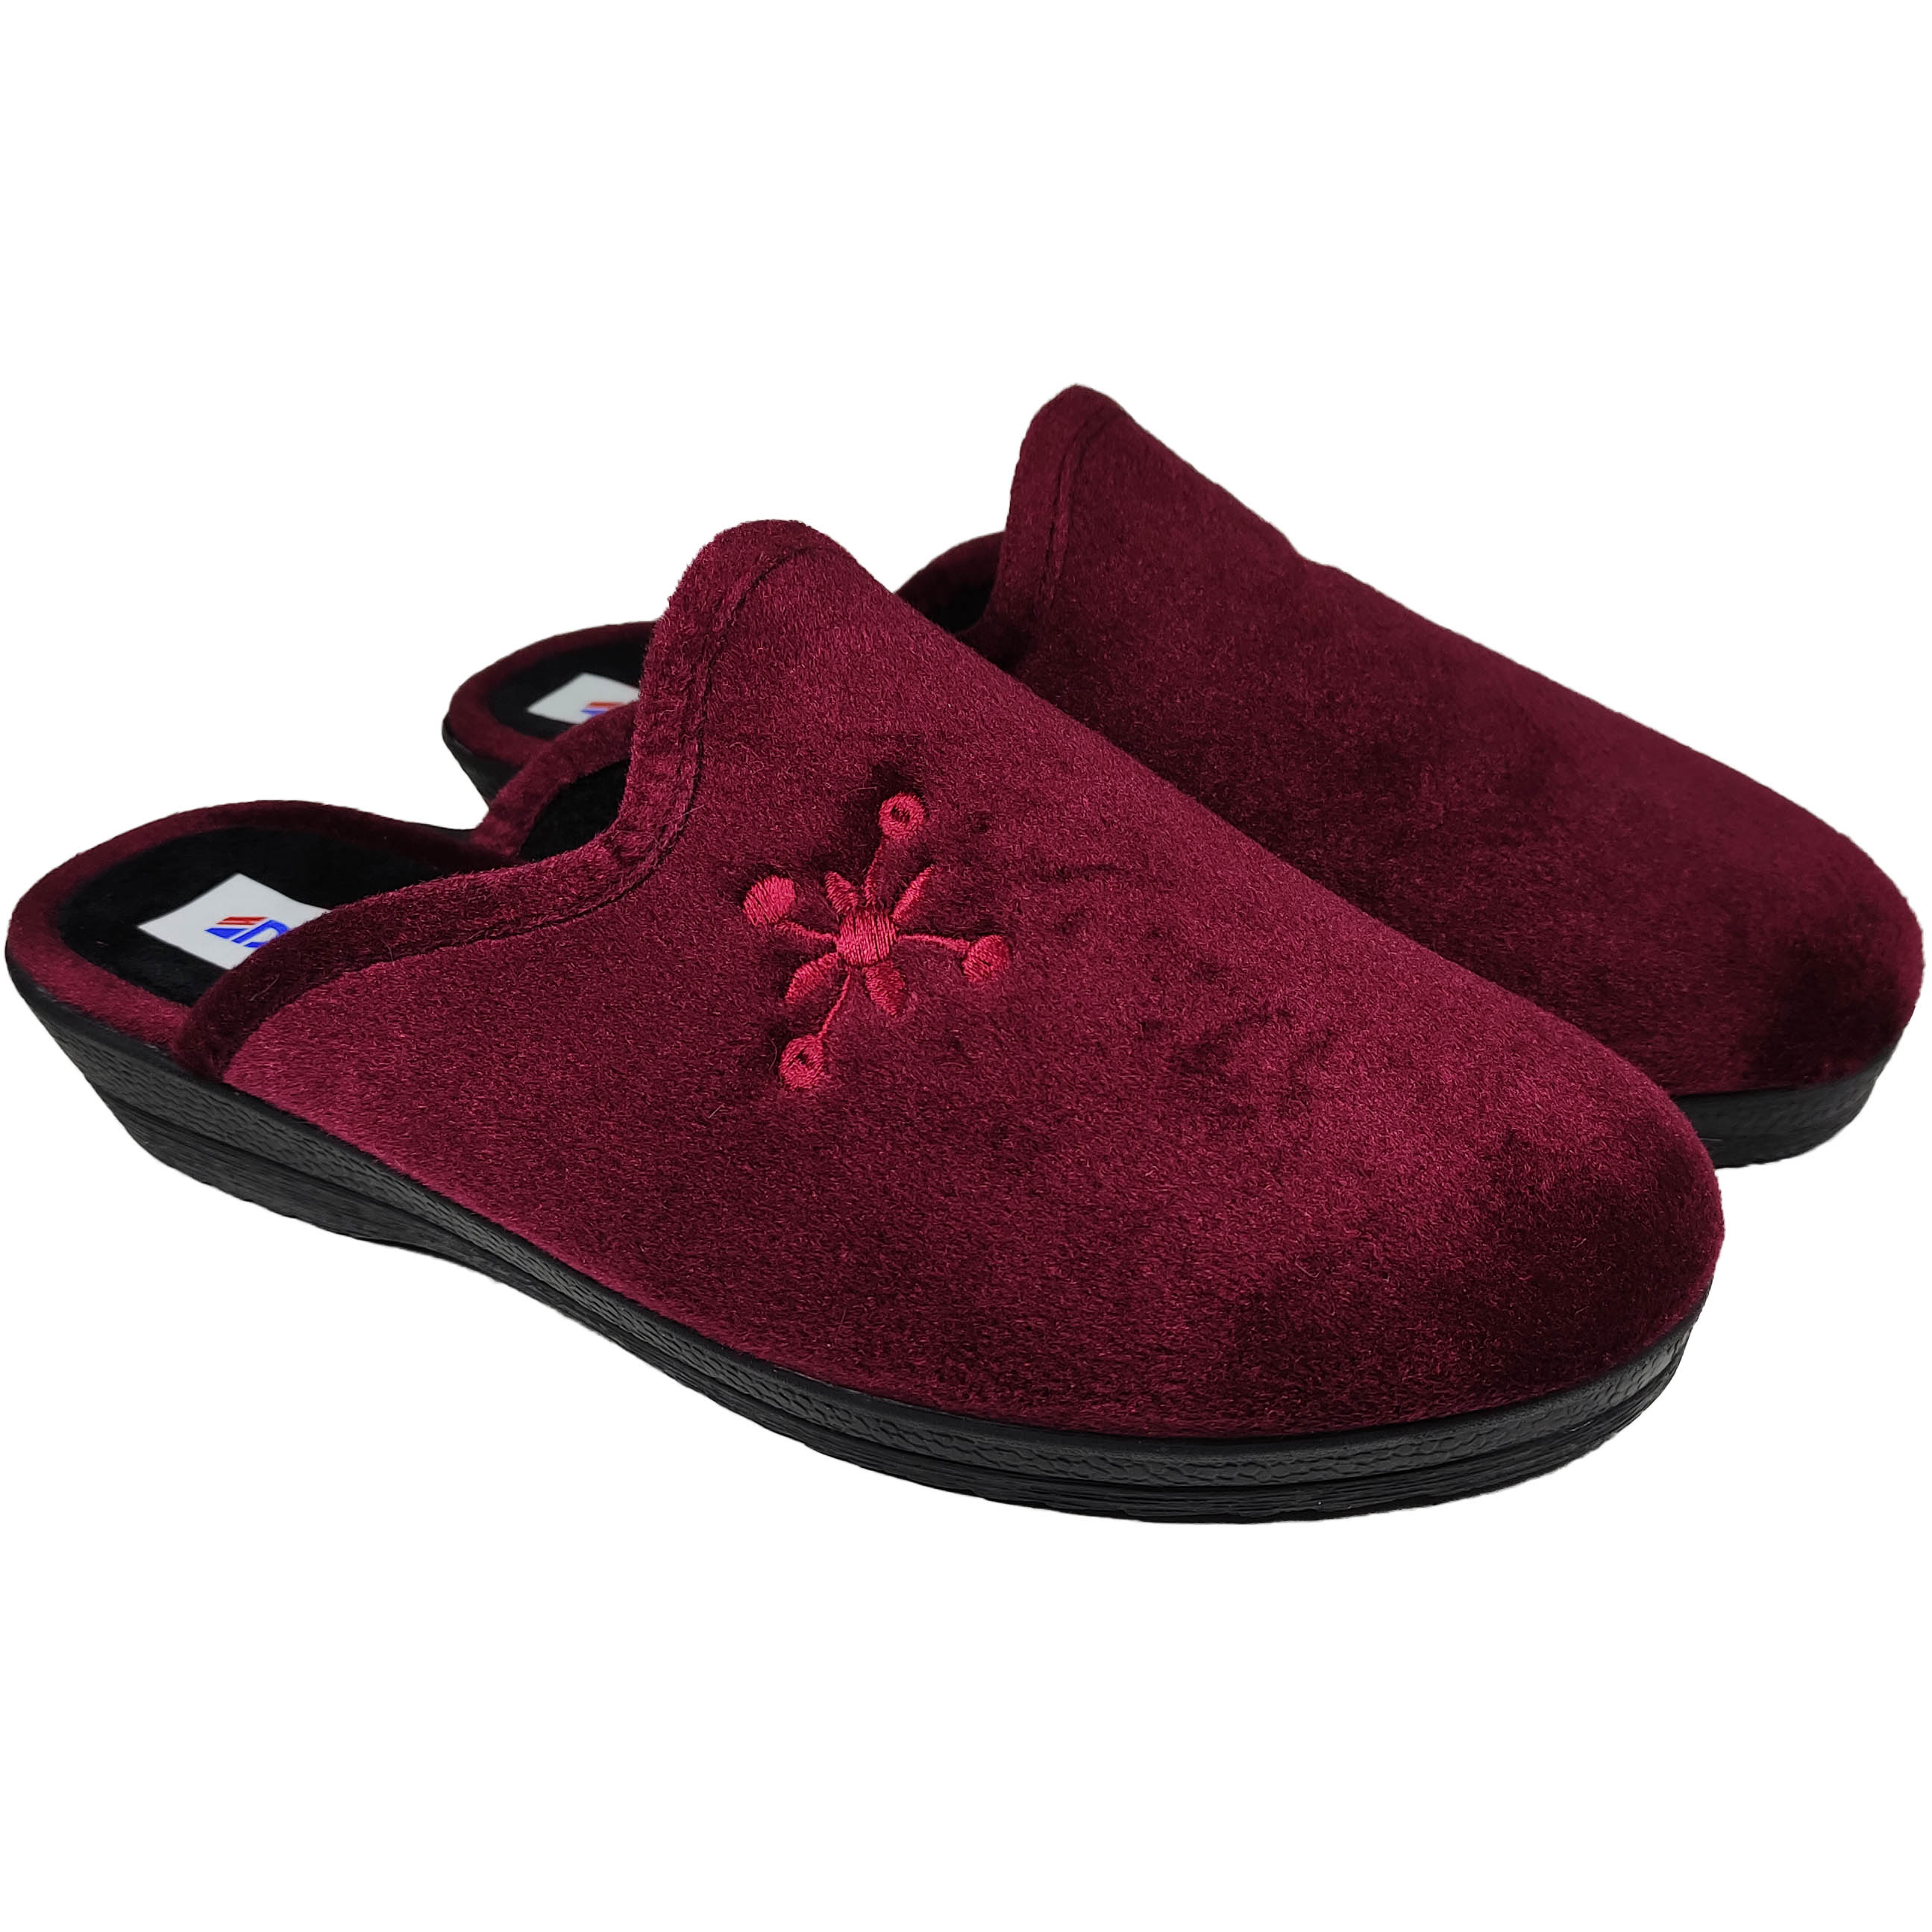 Winter Womens Slippers Dicas 44865 Bordeaux